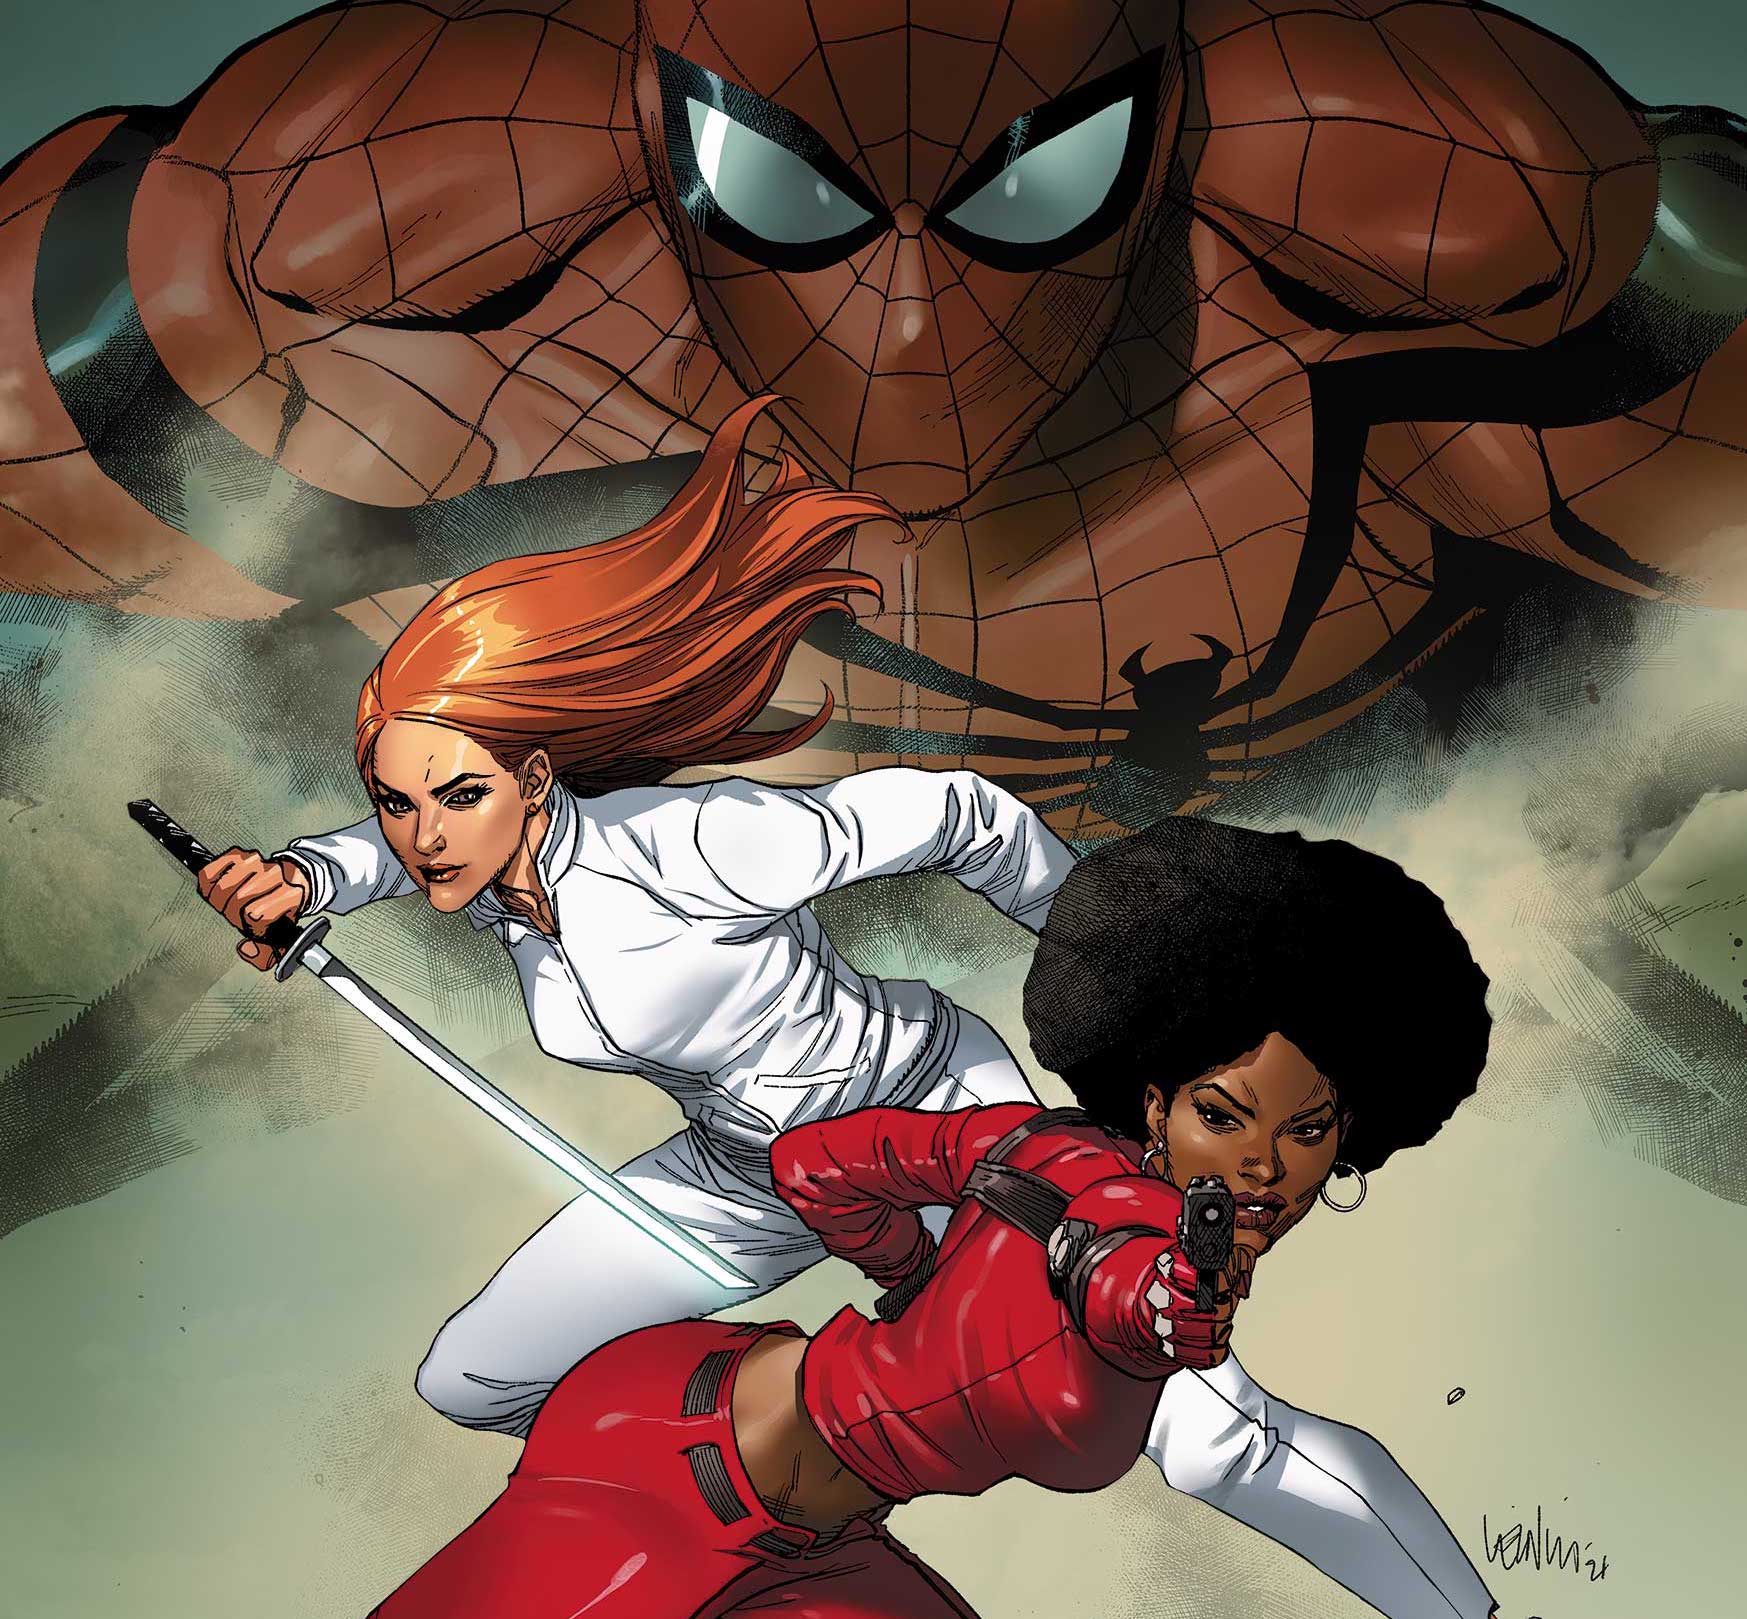 'The Amazing Spider-Man' #78.BEY is a super fun, high-energy thrill ride